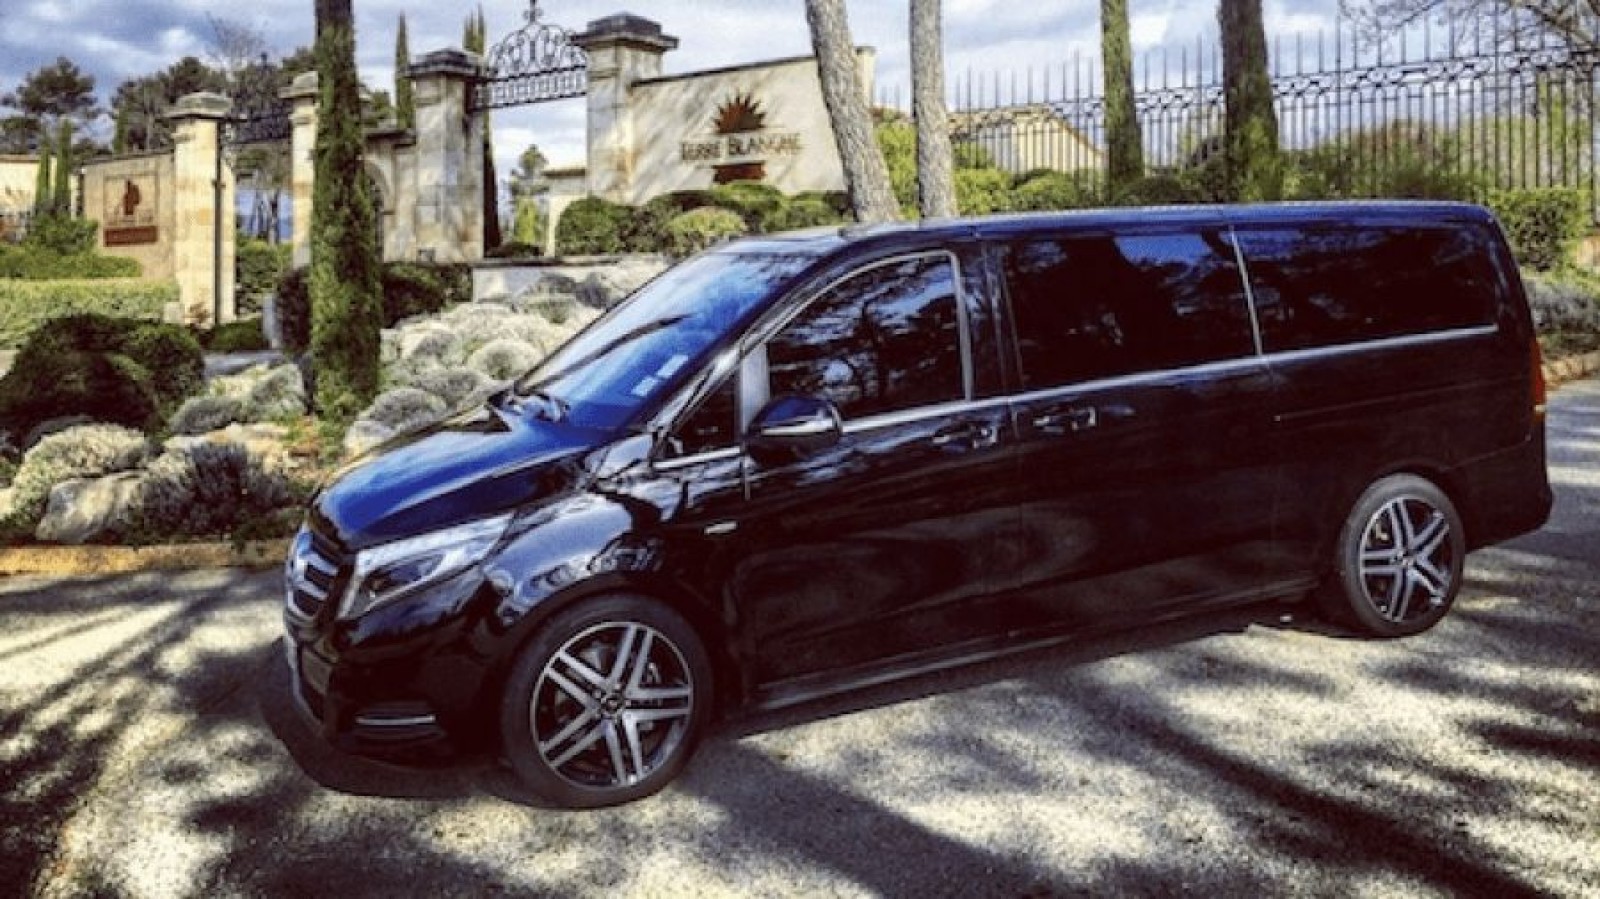 Private Chauffeur in Courchevel - Premium Vehicles & Services - Reactivity 24/7 - Ruby Services - Car Rental with Driver in Courchevel